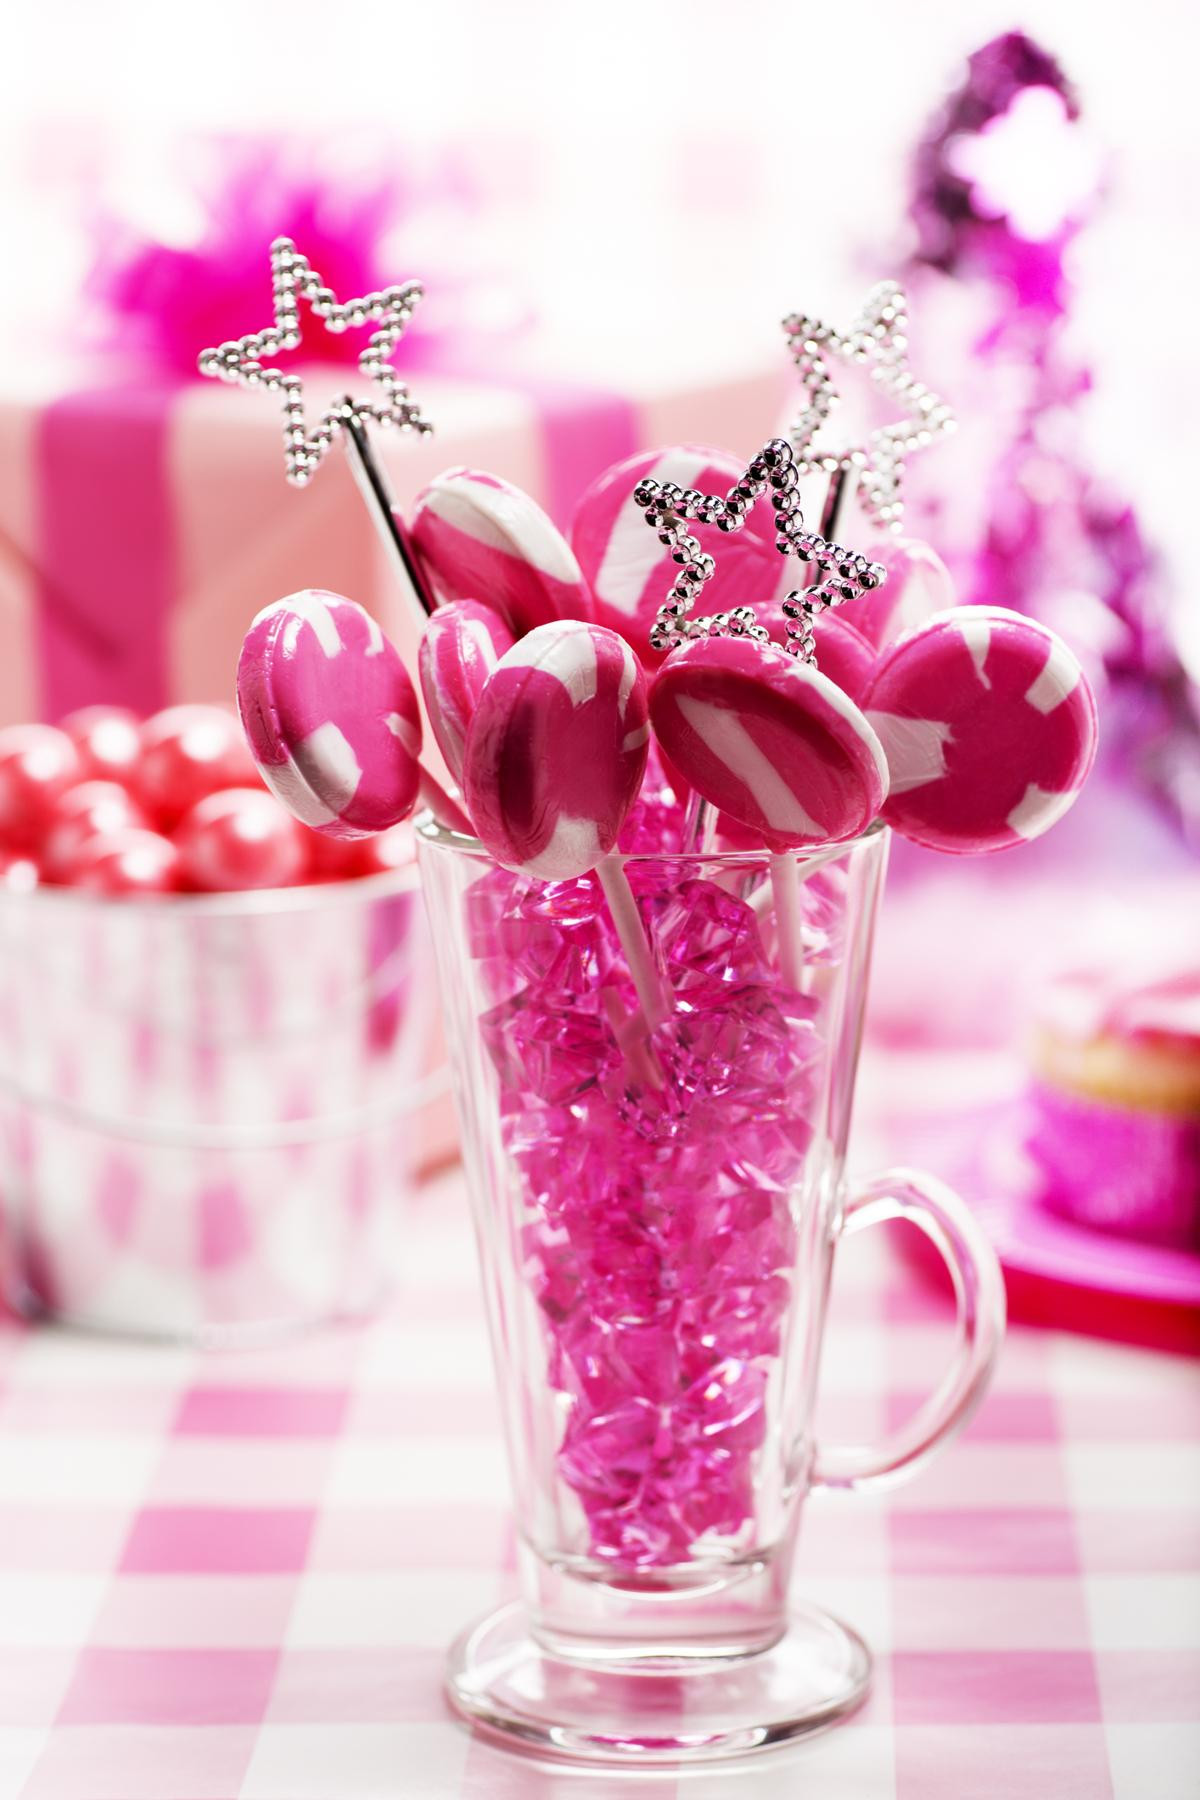 Birthday Party Ideas For A 13 Year Old Girl
 Party Ideas for 13 year old Girls Birthday Frenzy